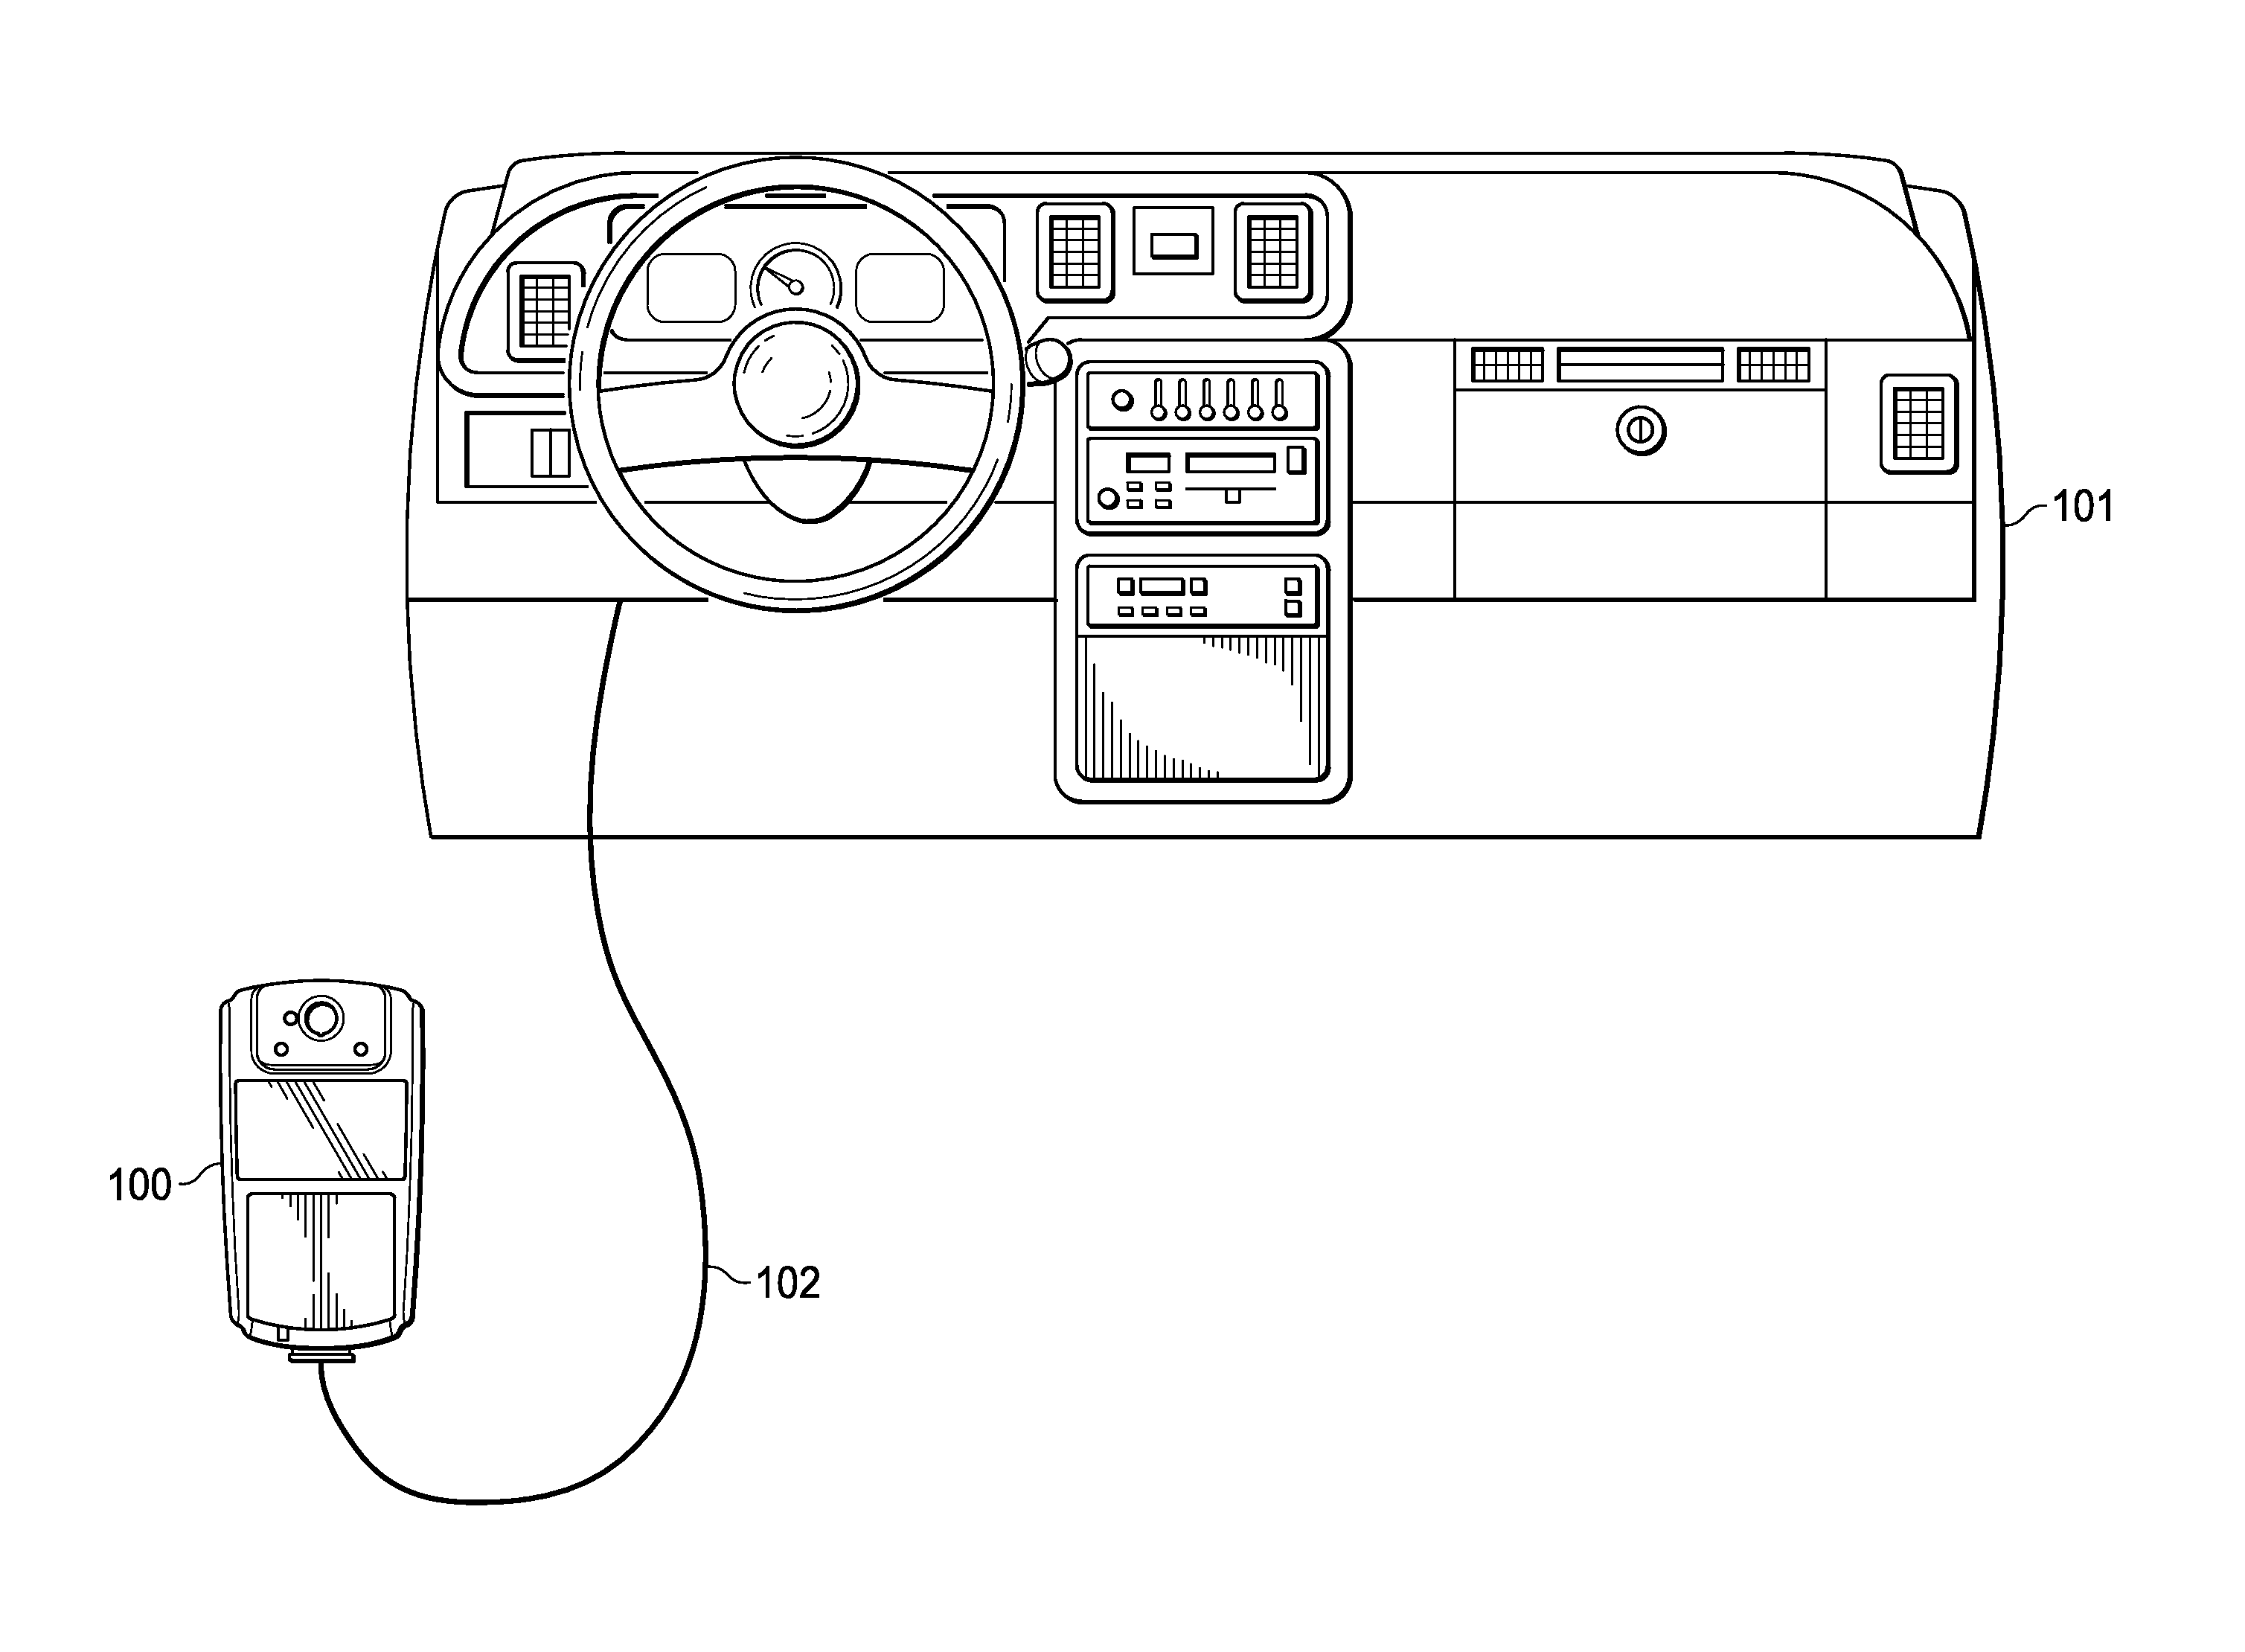 Vehicle sobriety interlock systems and methods with vehicle warm-up support